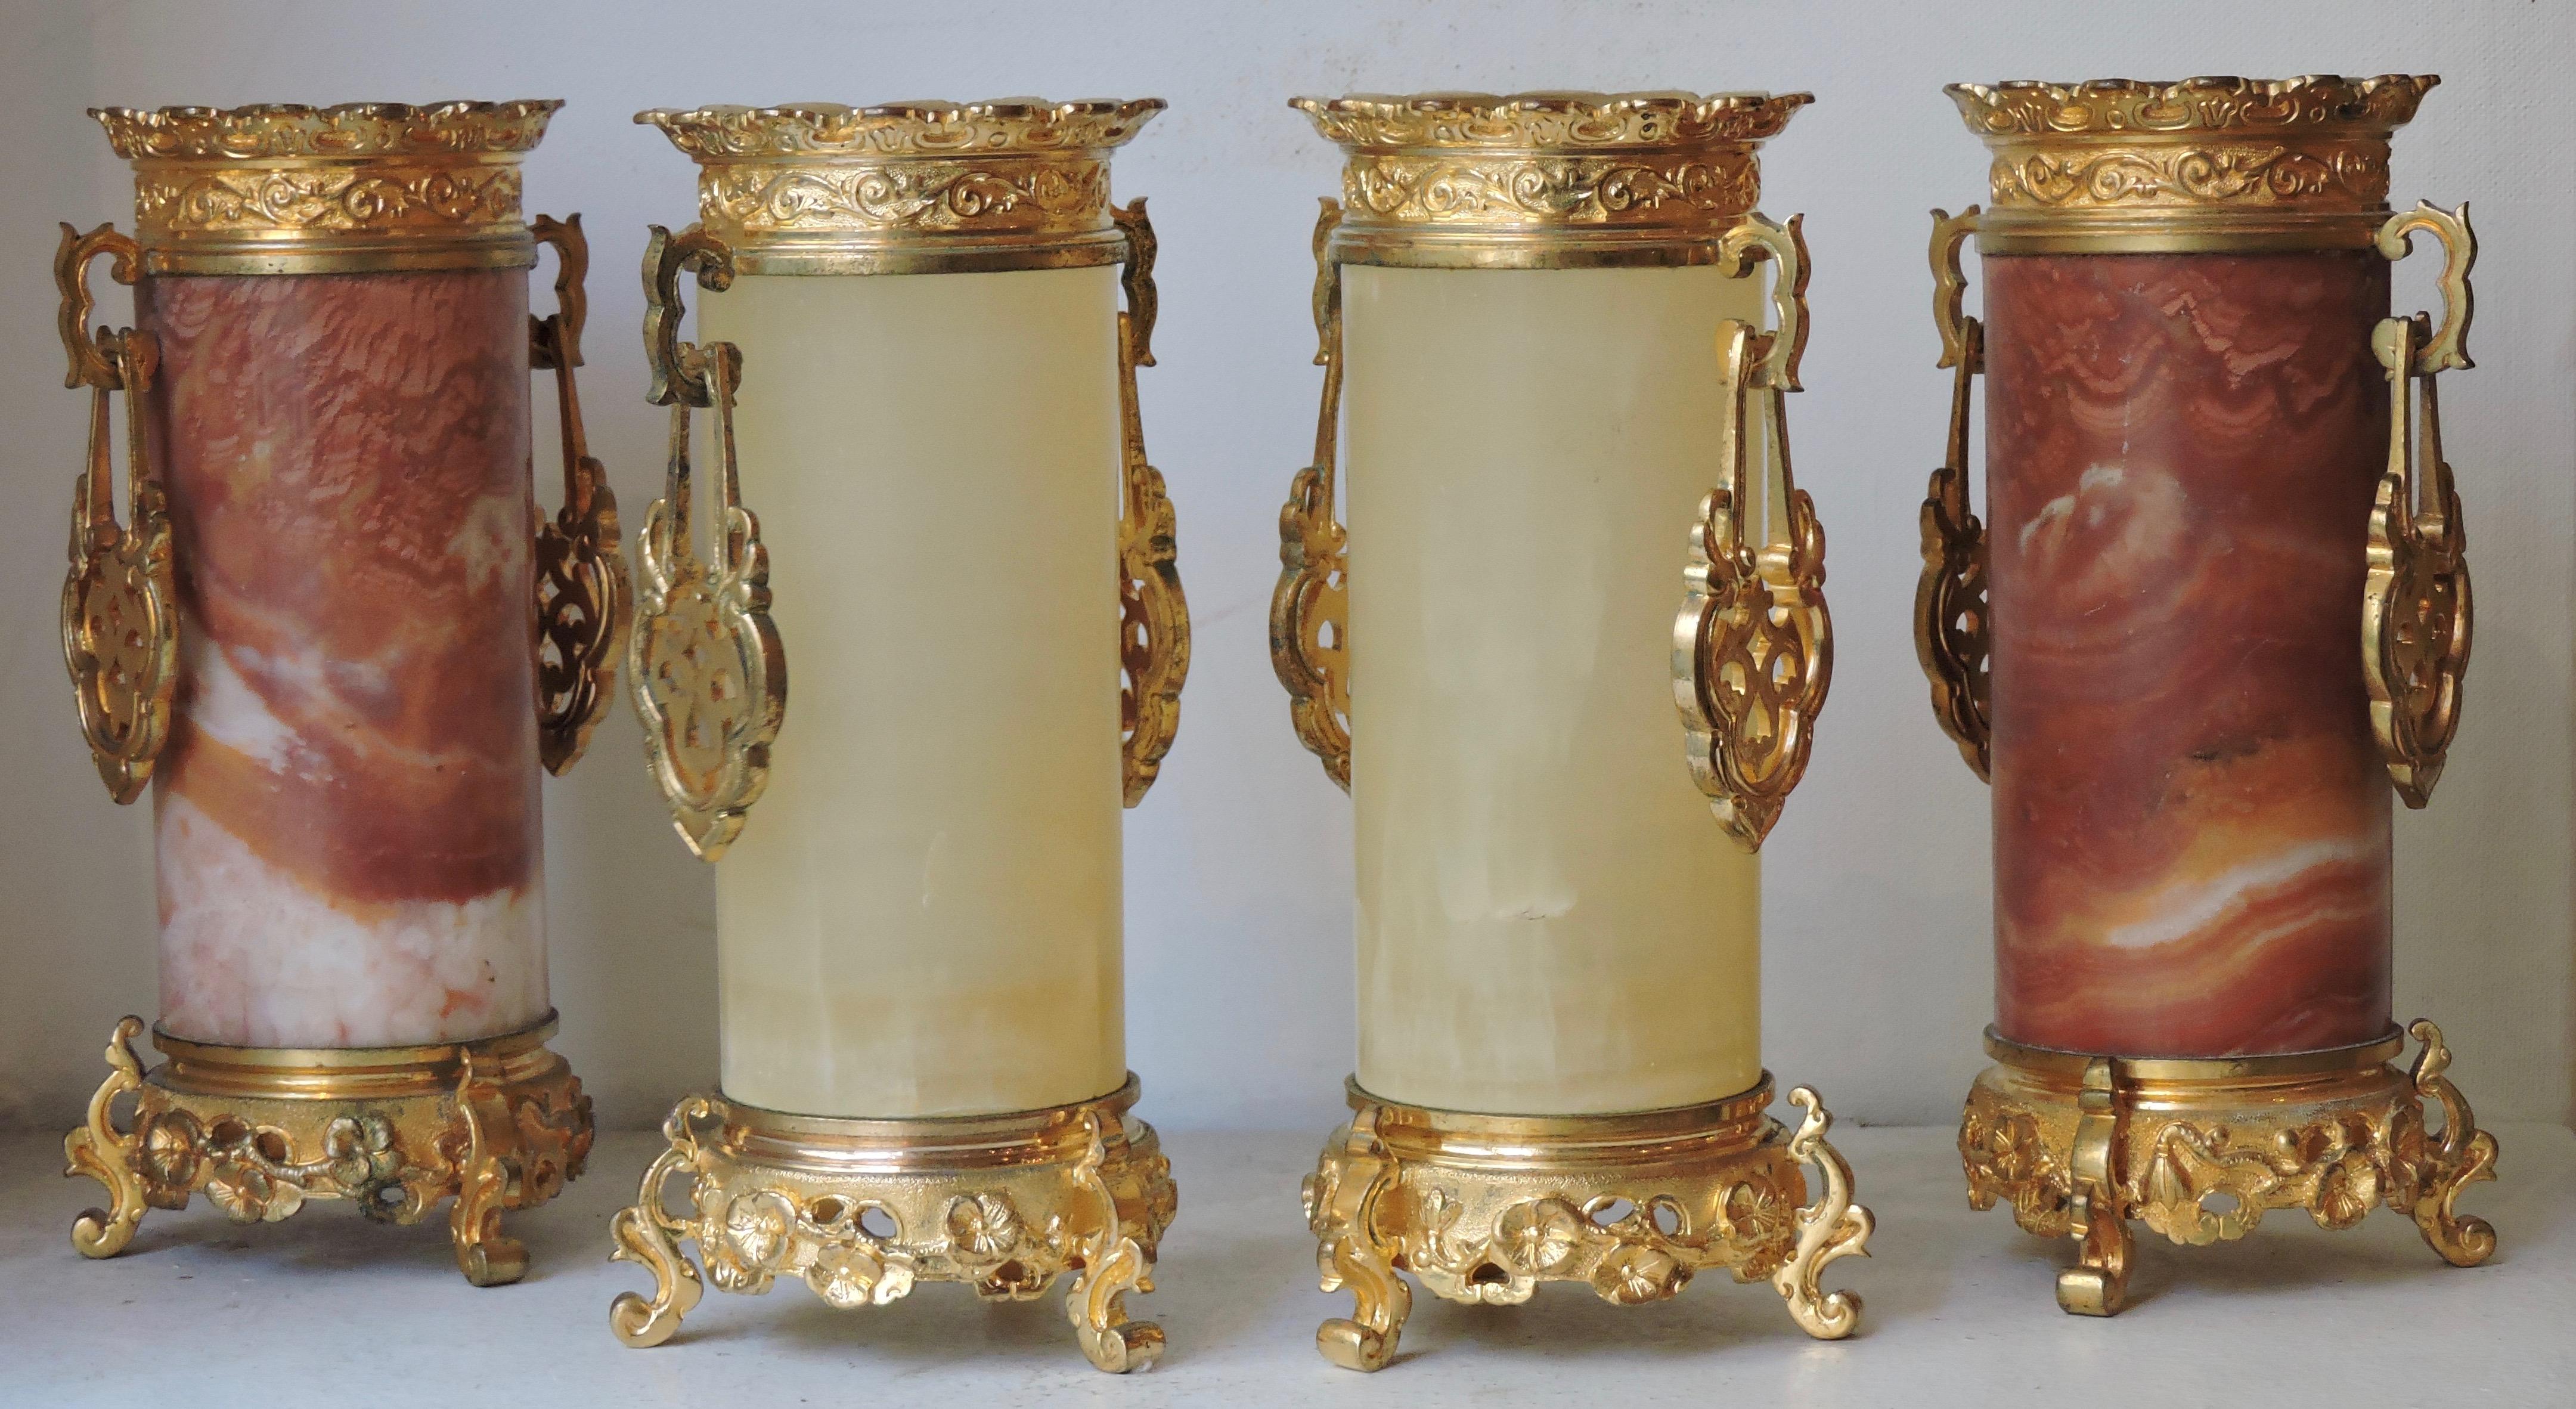 French Set of 4 Japonisme Marble, Onyx and Ormolu Vases in the Style of Edouard Lièvre